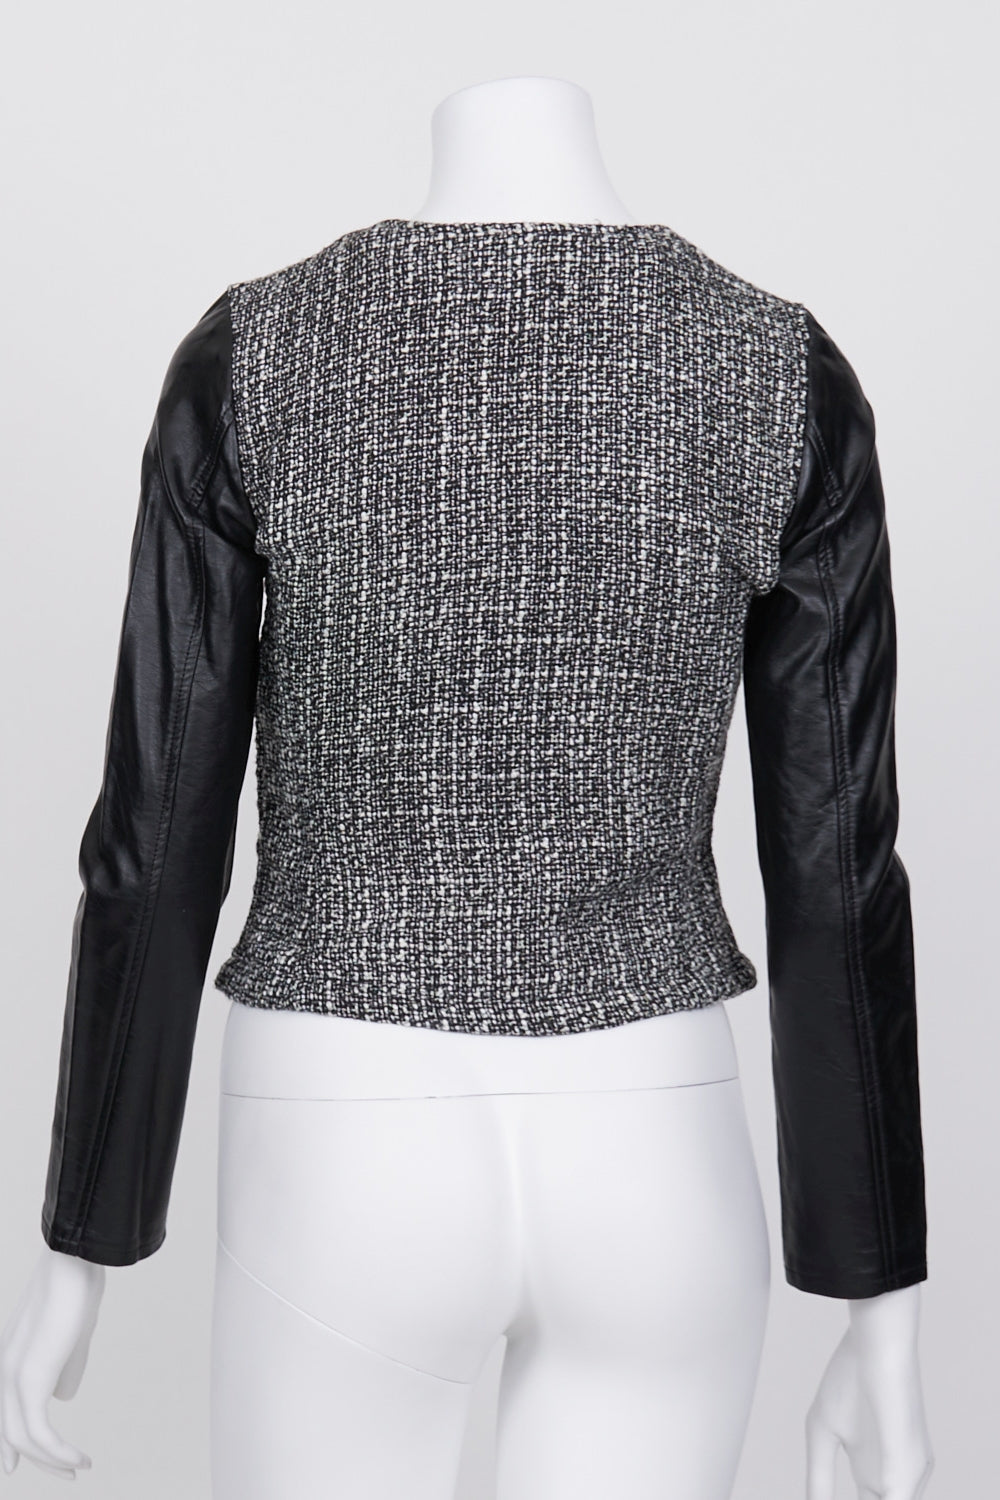 H&M Black And White Patterned Jacket 4